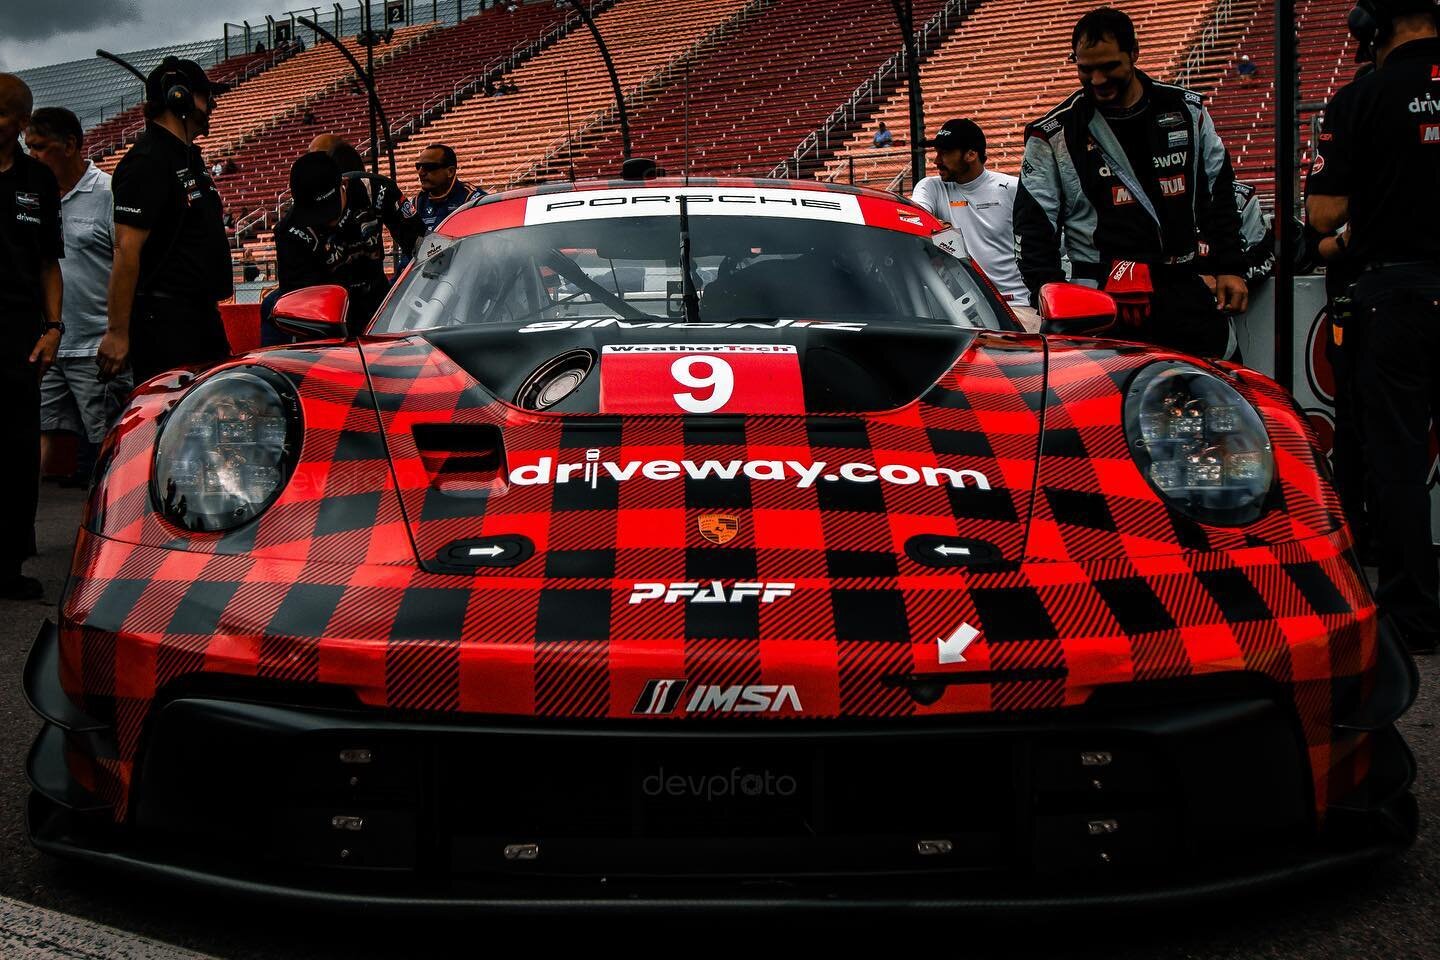 it wouldn&rsquo;t have been a Sahlen&rsquo;s 6 without a hint of #plaidporsche

excited to get into the weekend and check out @pfaffmotorsports rocking a new livery for their home race!🇨🇦

#imsa #watkinsglen #sahlens6hrs #canada #plaid #maplesyrup